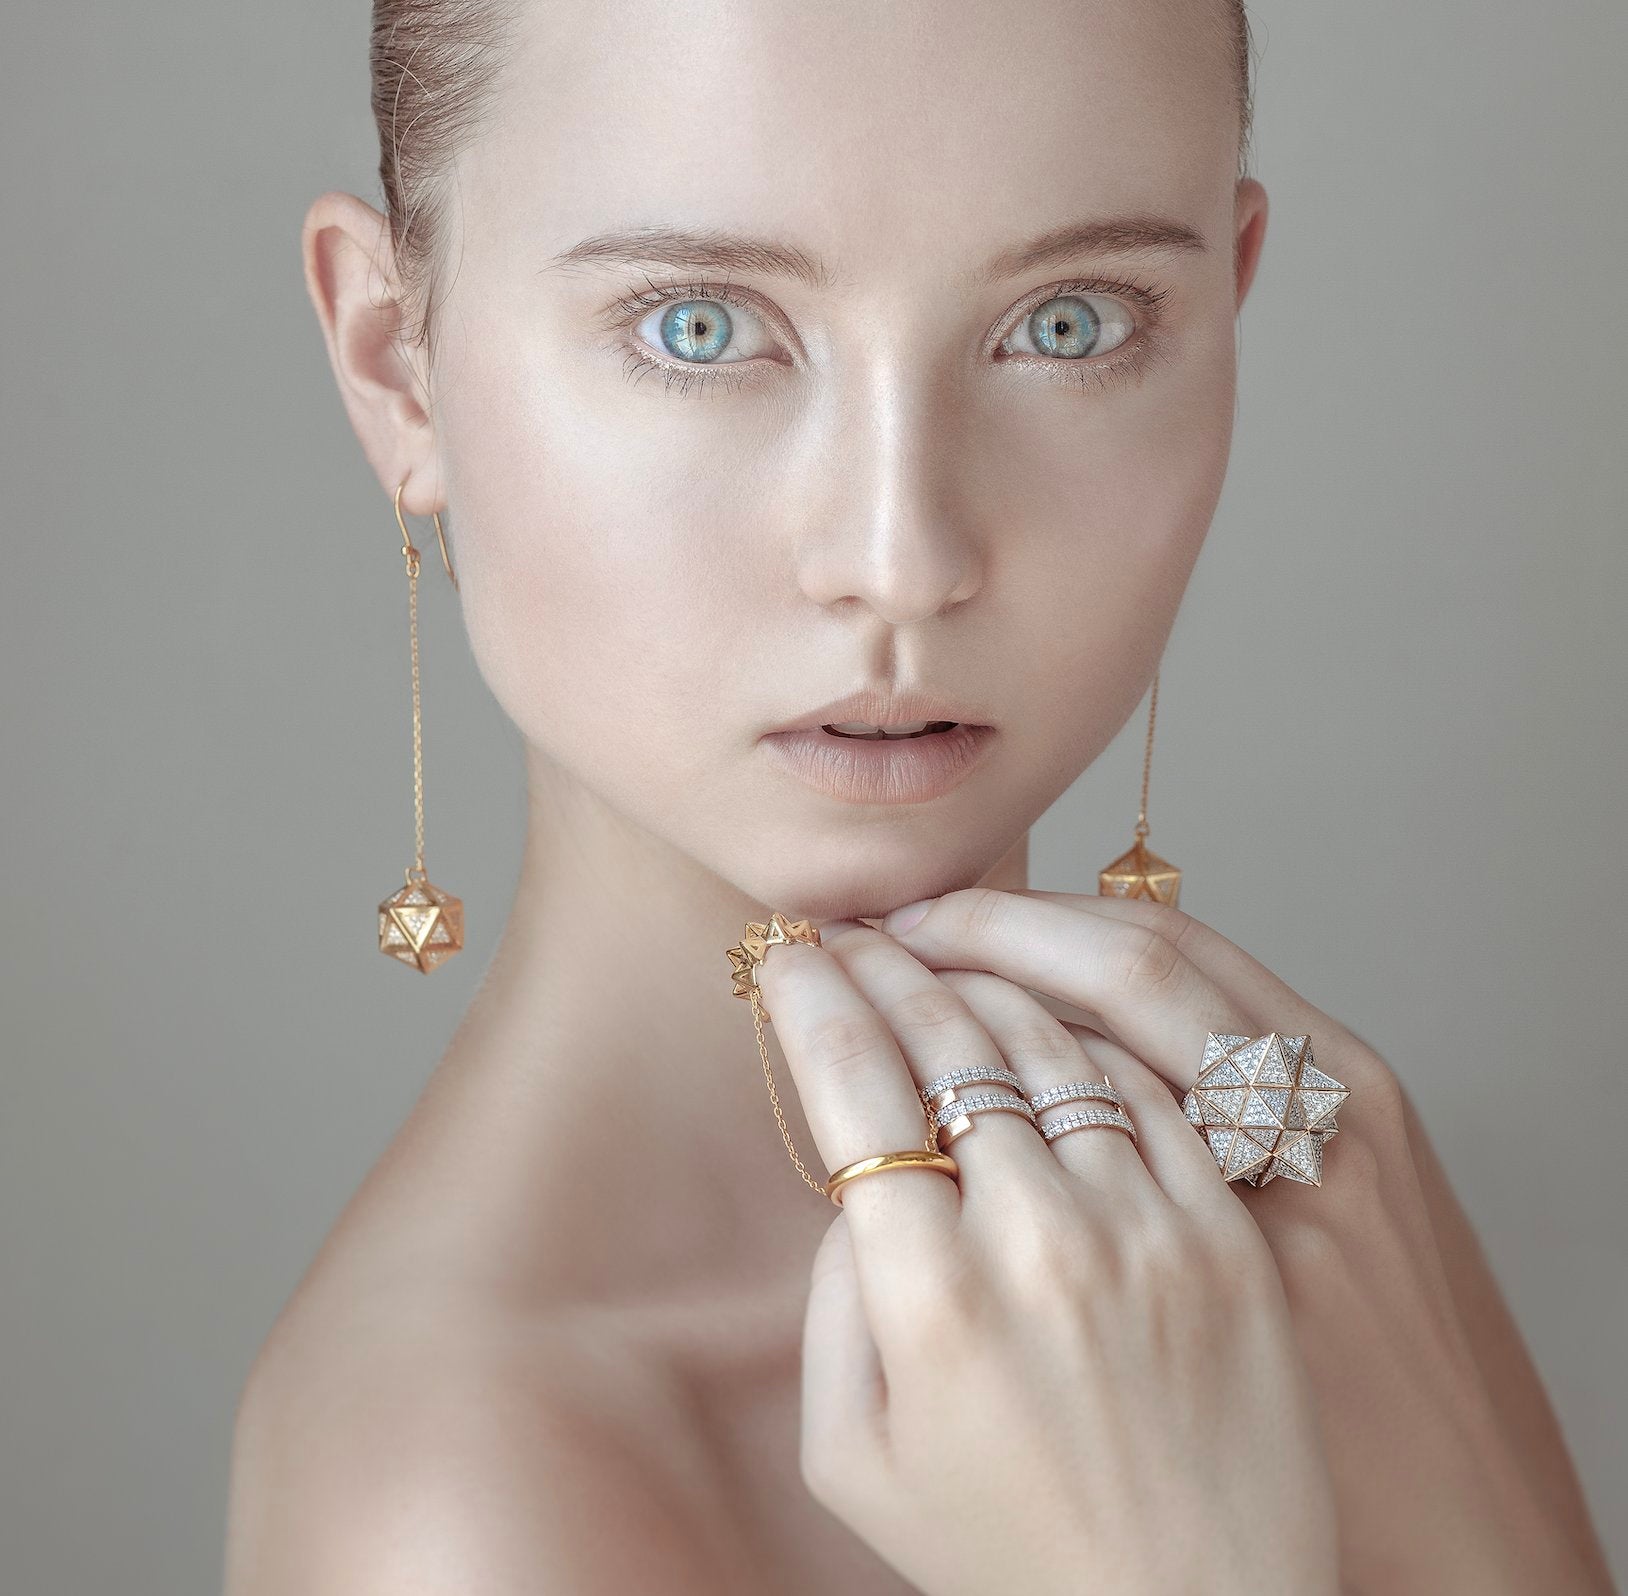 Idylle Blossom in Collections for Jewelry